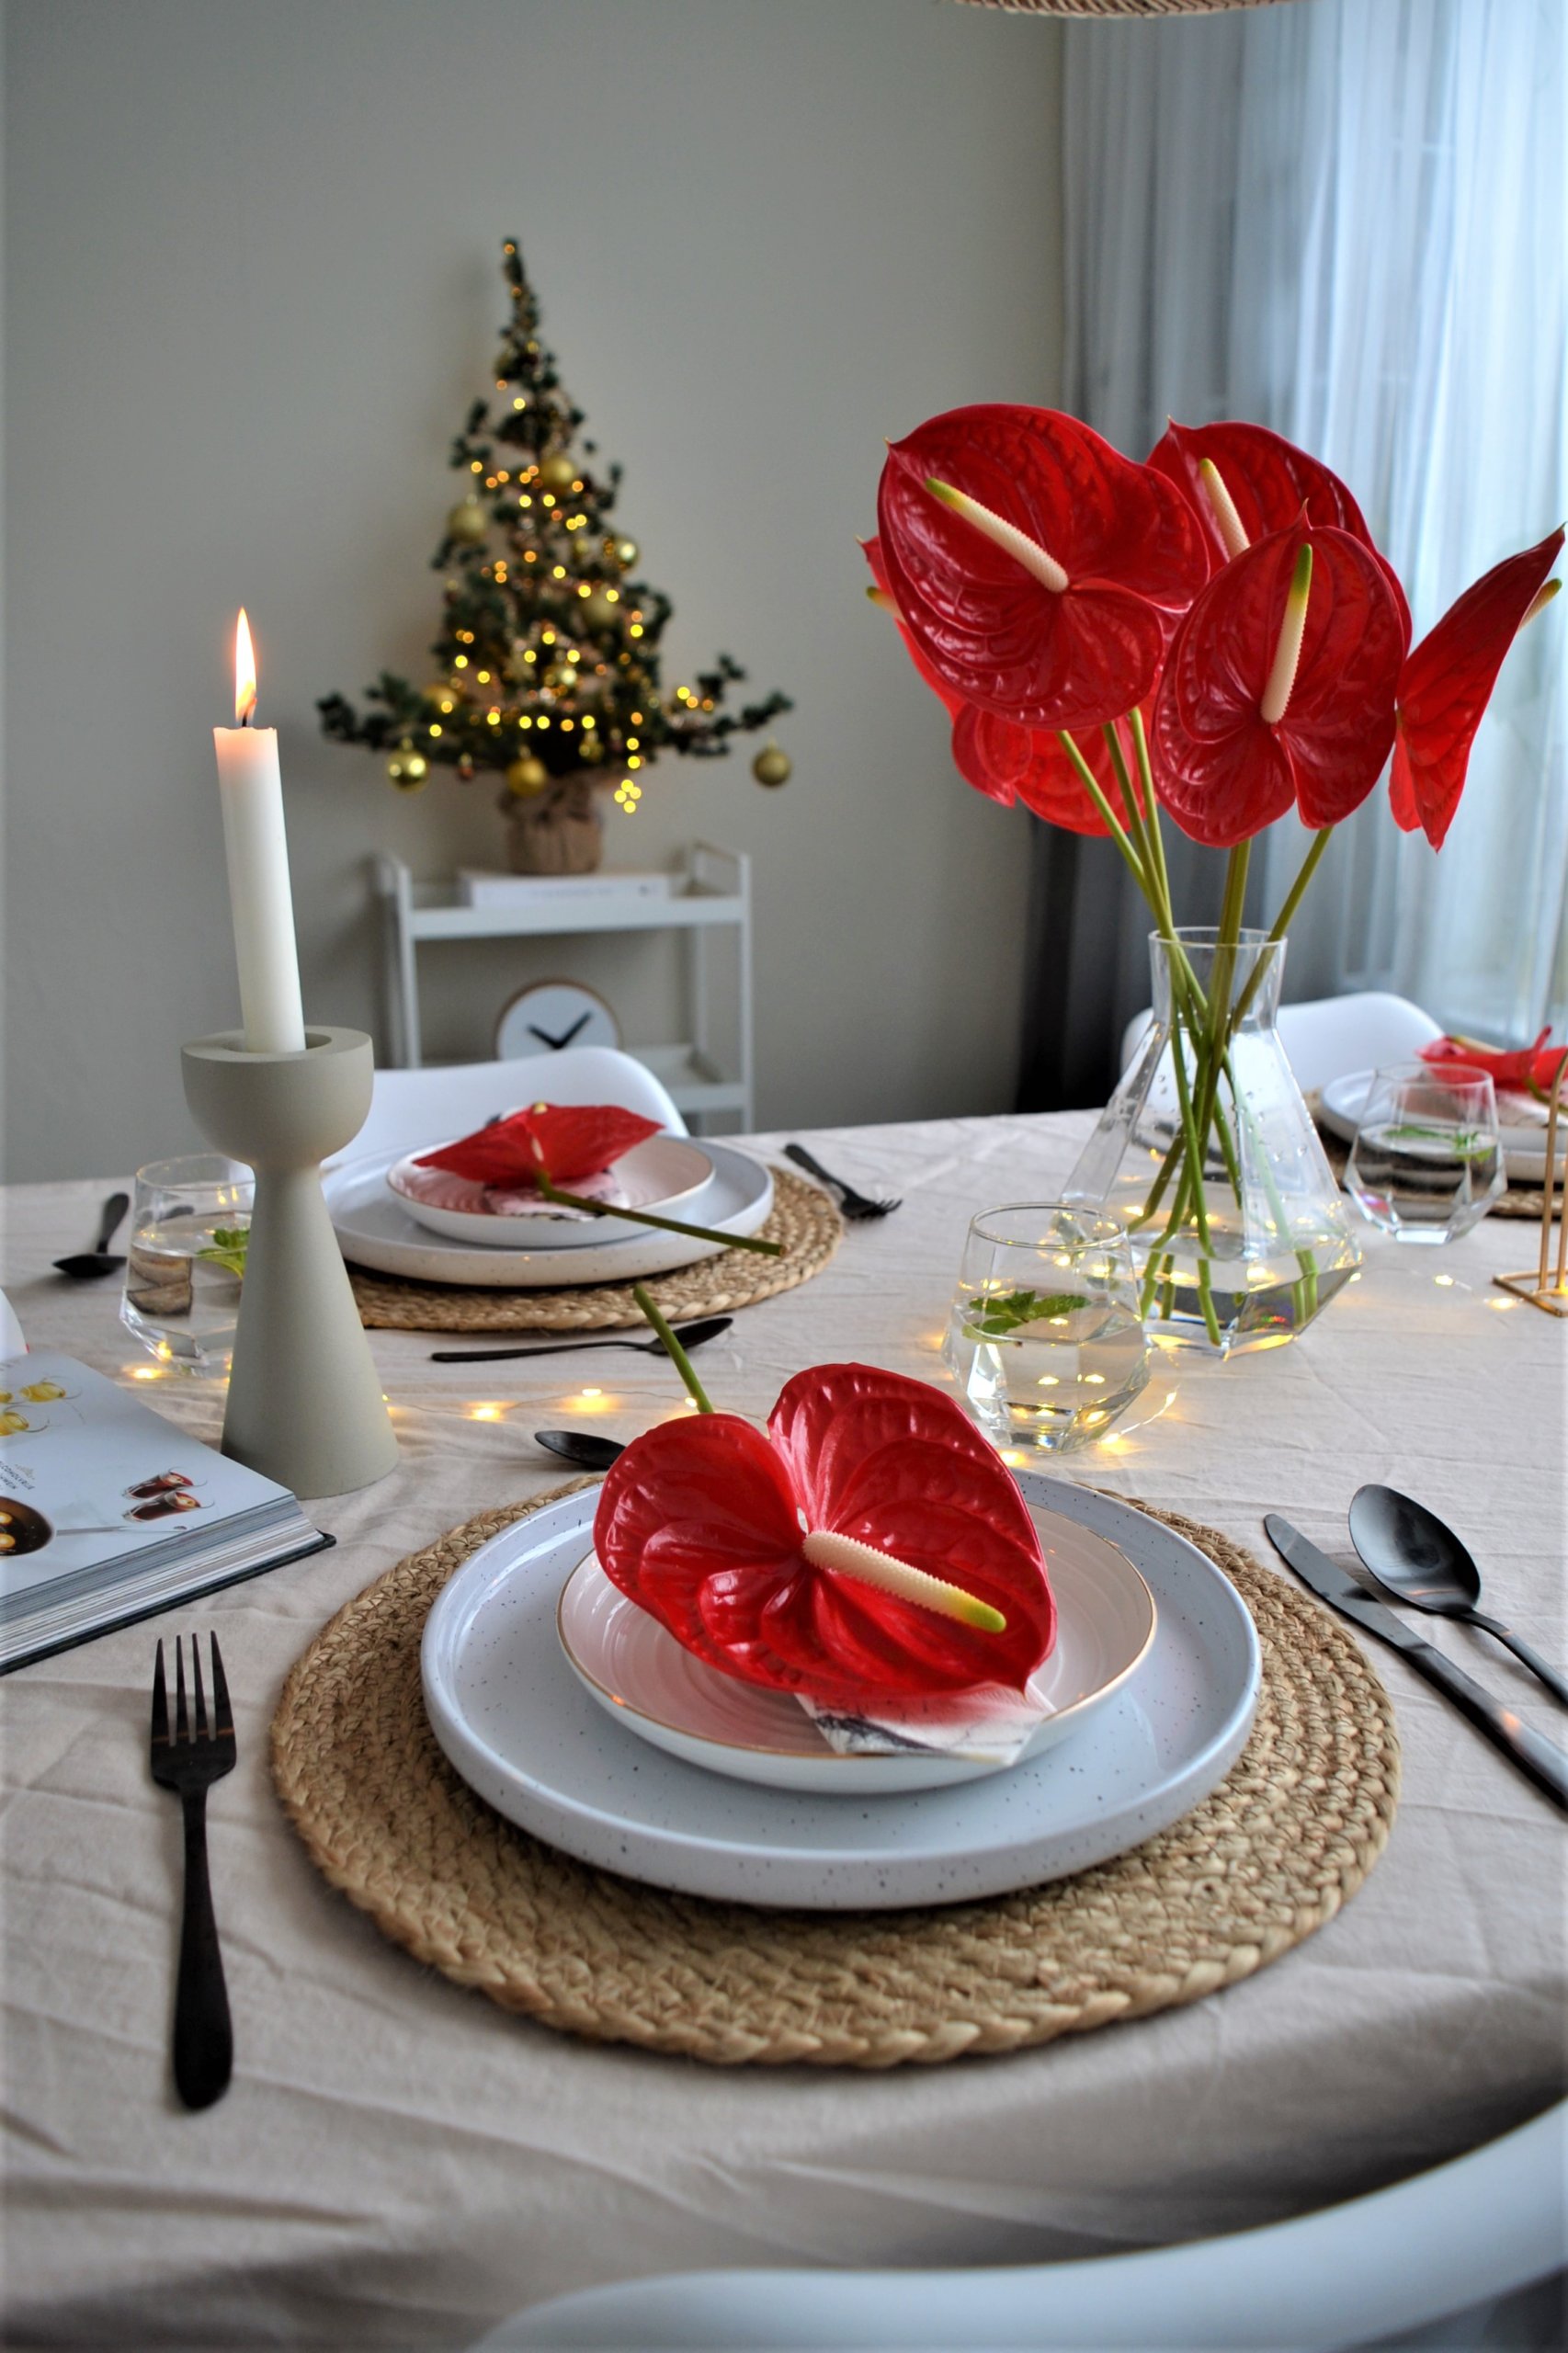 Christmas table setting with red Anthurium flowers